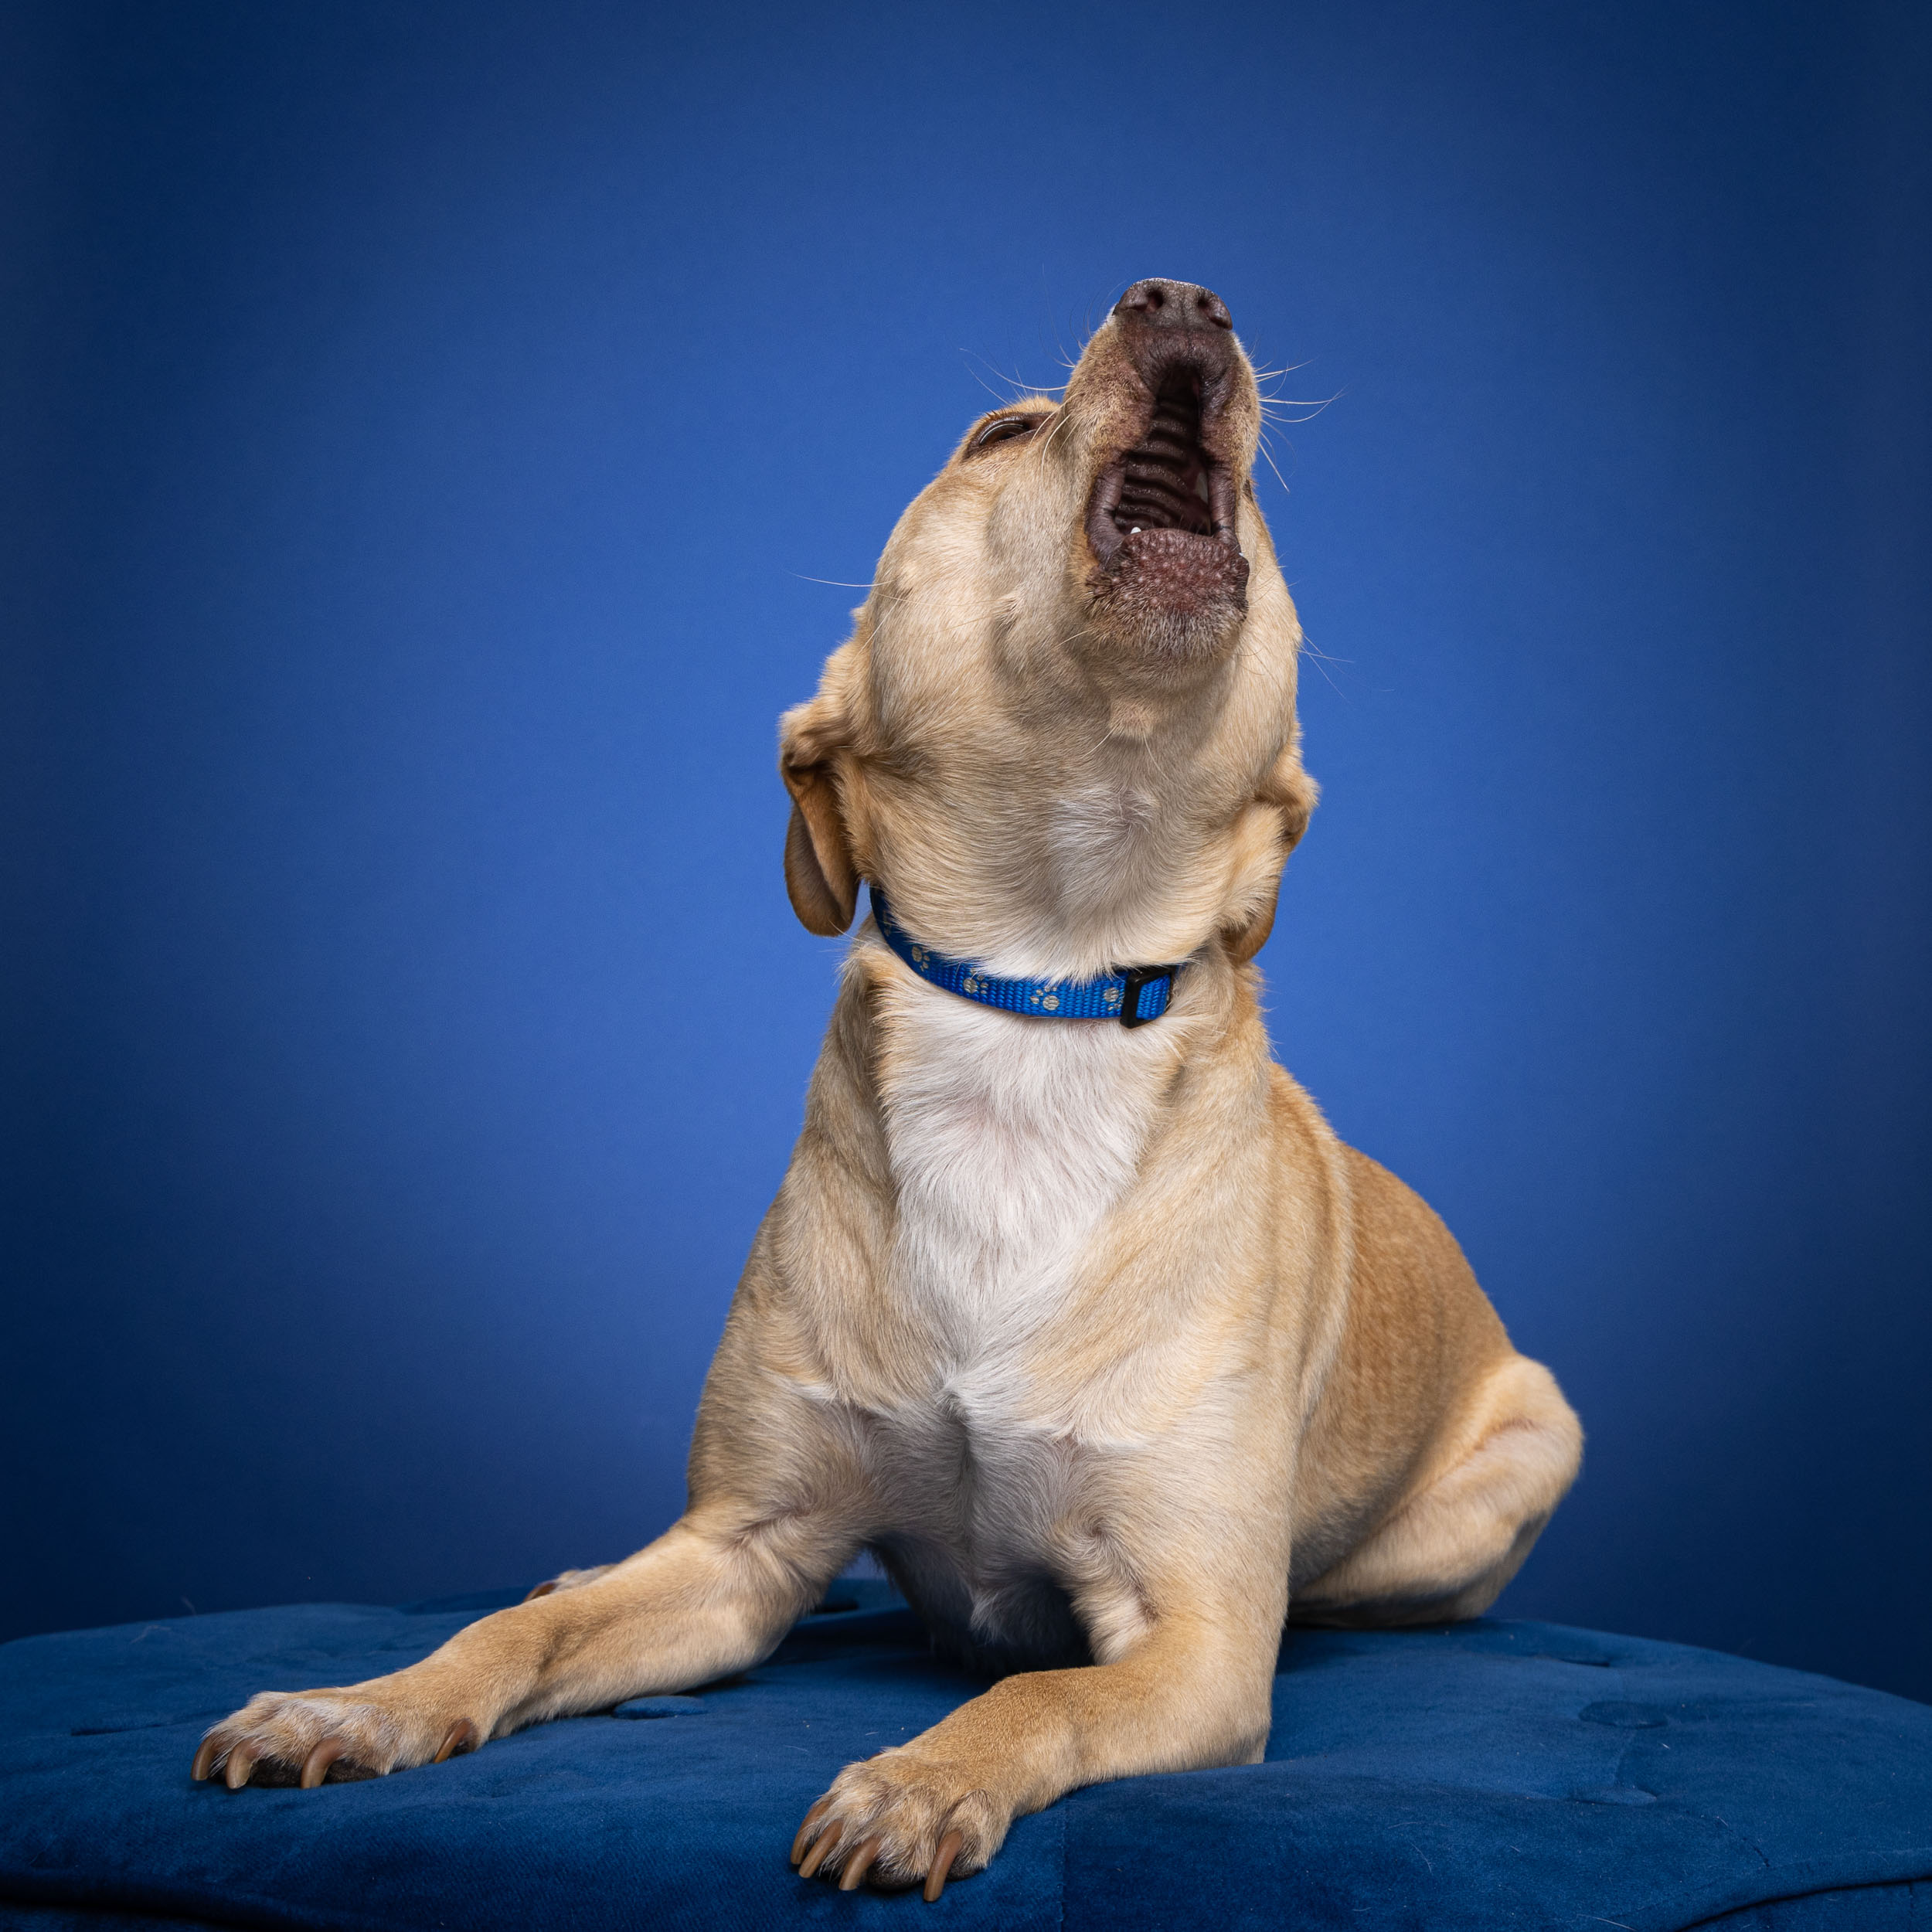 Funny Dog Photography | Howling Dog on Blue by Mark Rogers